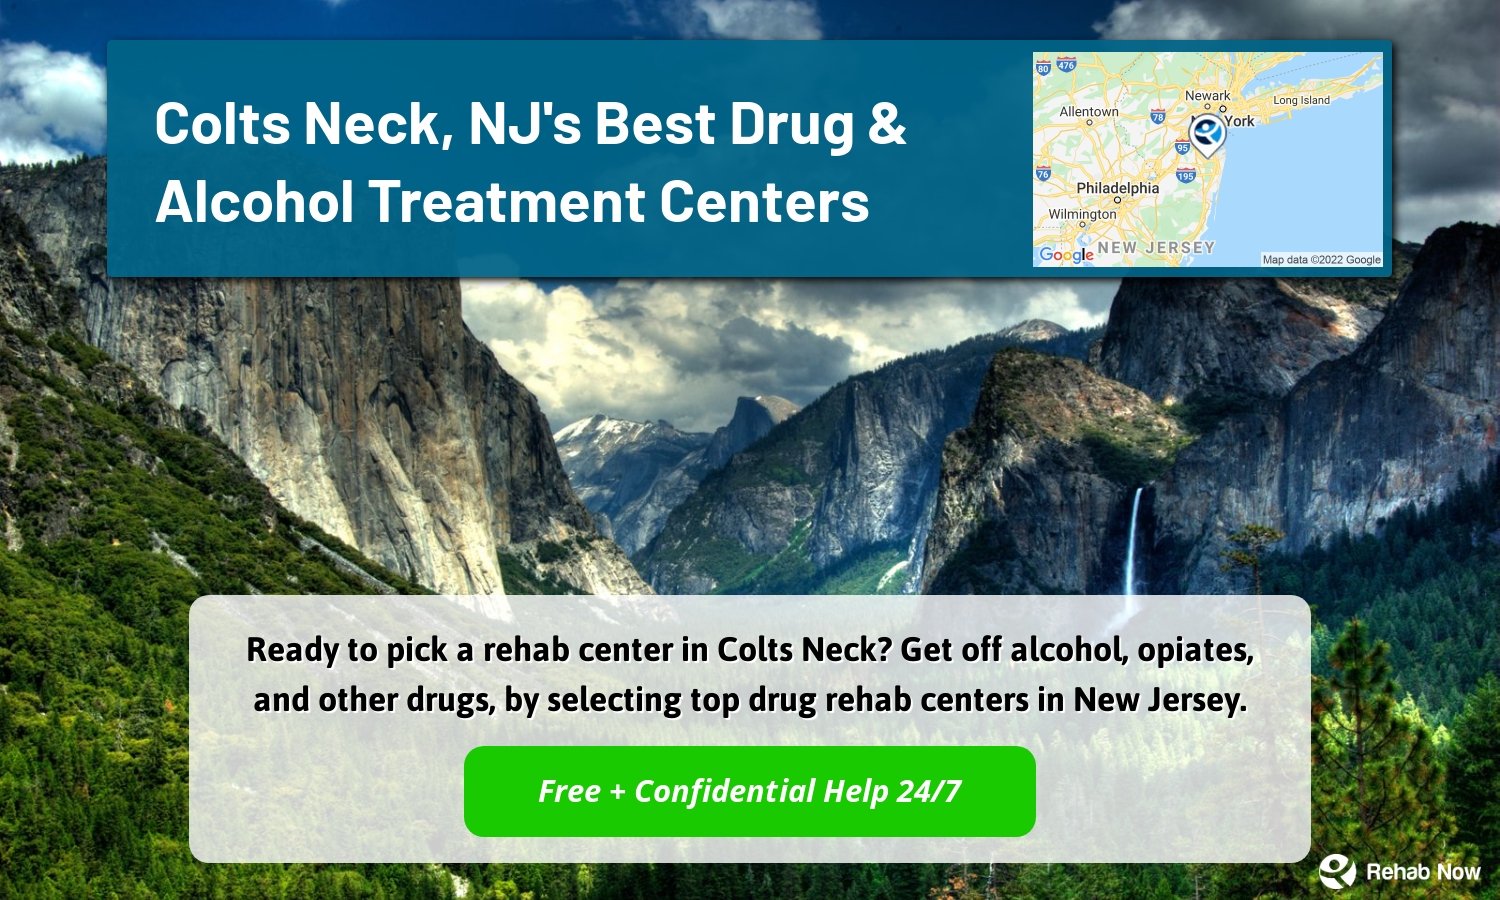 Ready to pick a rehab center in Colts Neck? Get off alcohol, opiates, and other drugs, by selecting top drug rehab centers in New Jersey.